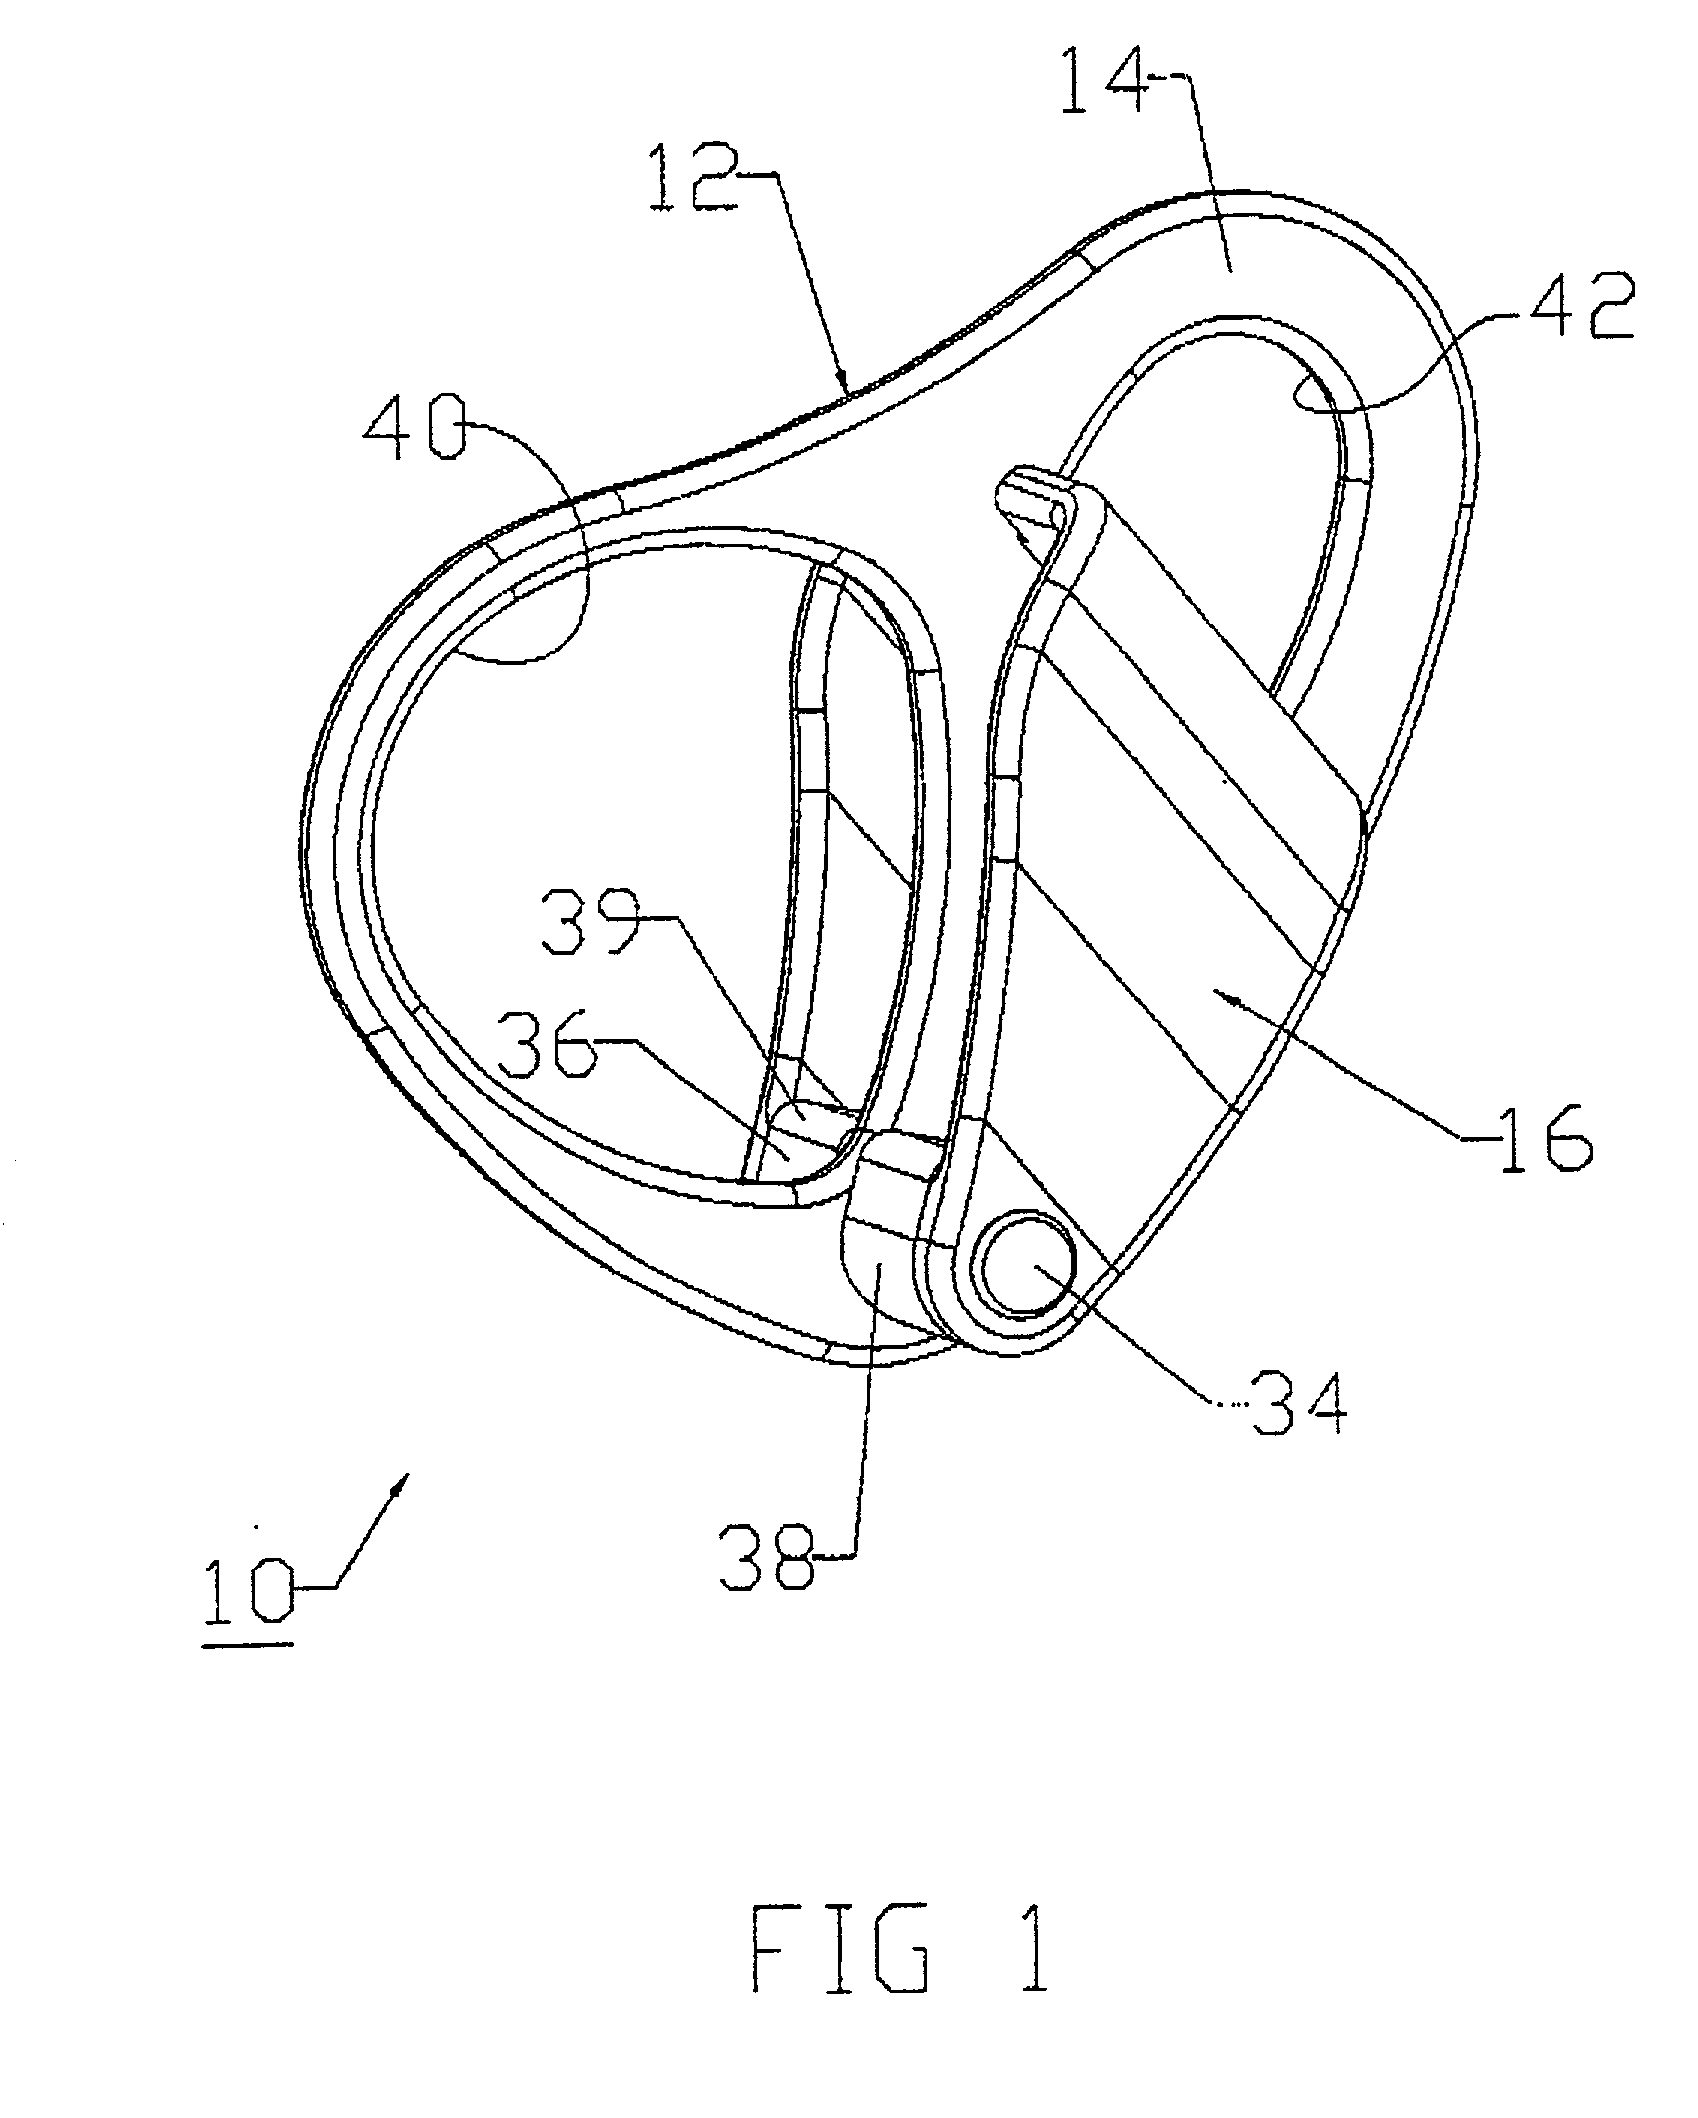 Belaying descending device for climbing or mountaineering